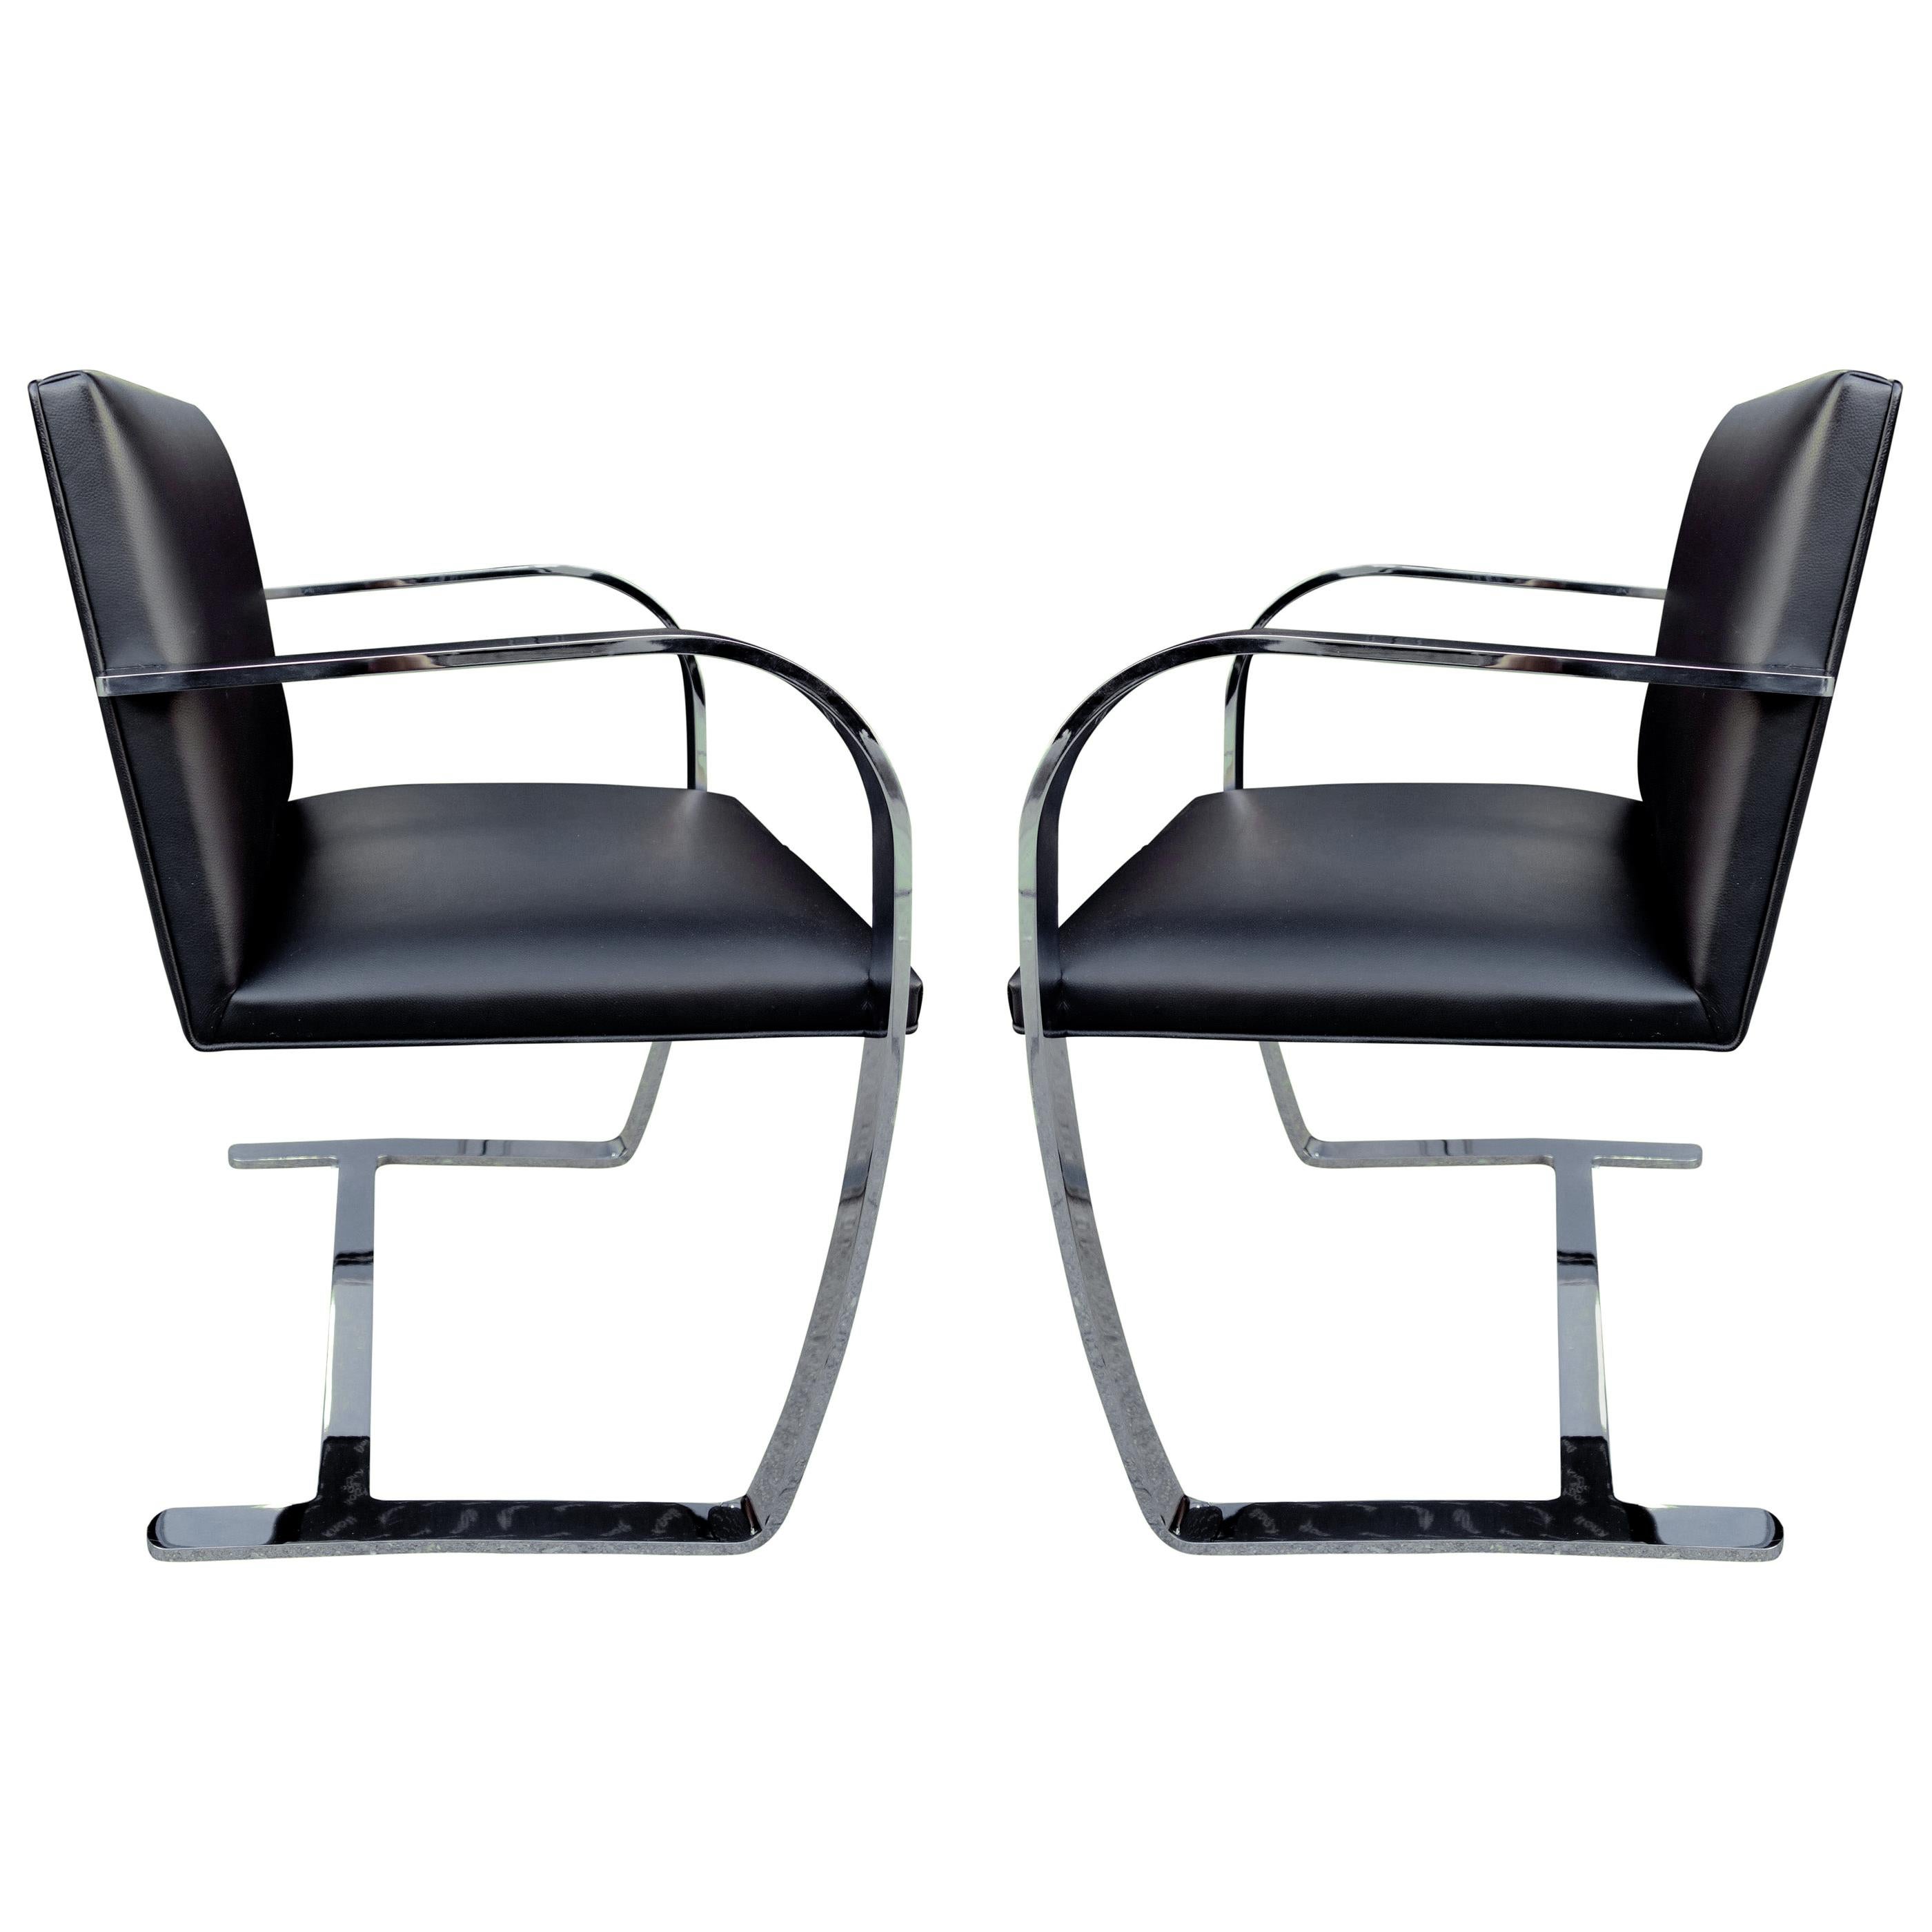 Authentic Midcentury Brno Armchairs for Knoll in Stainless Steel